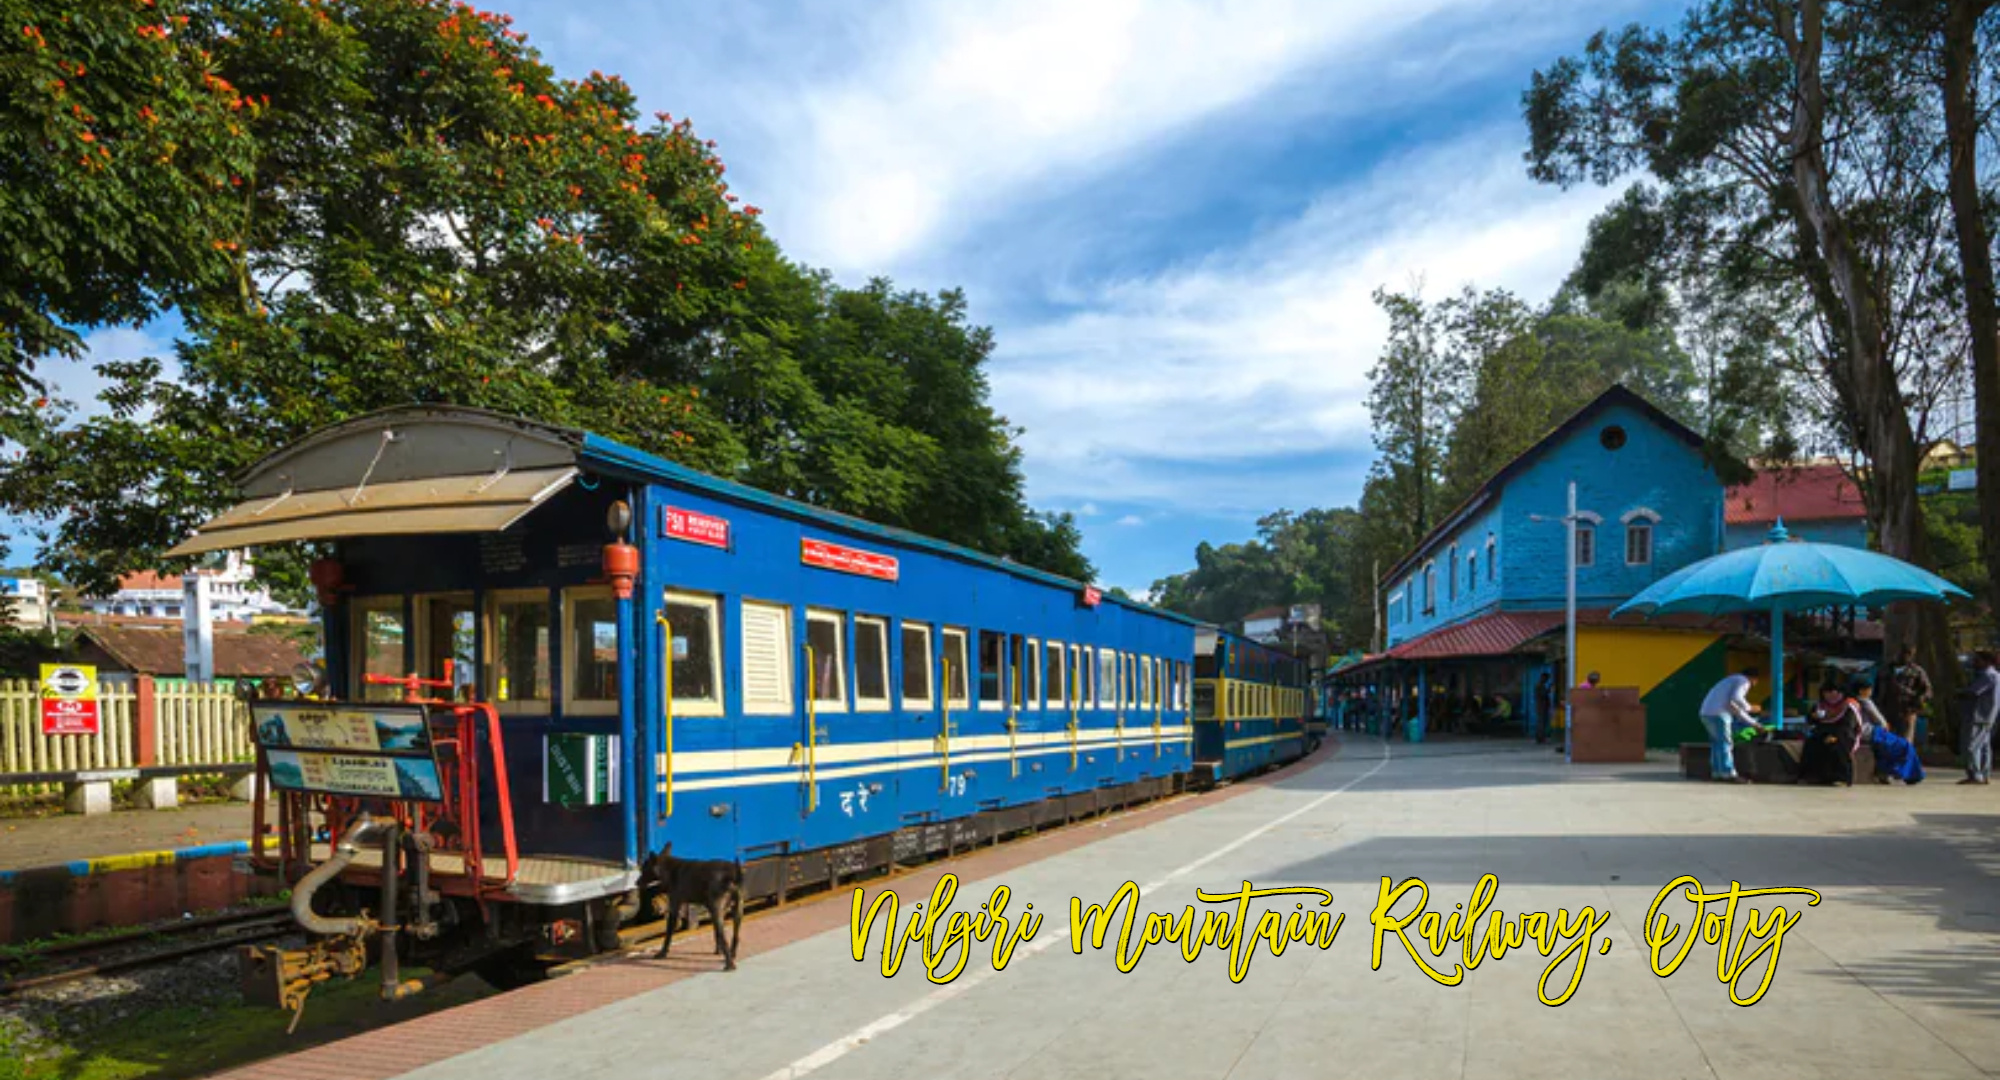 nilgiri mountain railway ooty, best places to visit in ooty, ooty tourist places